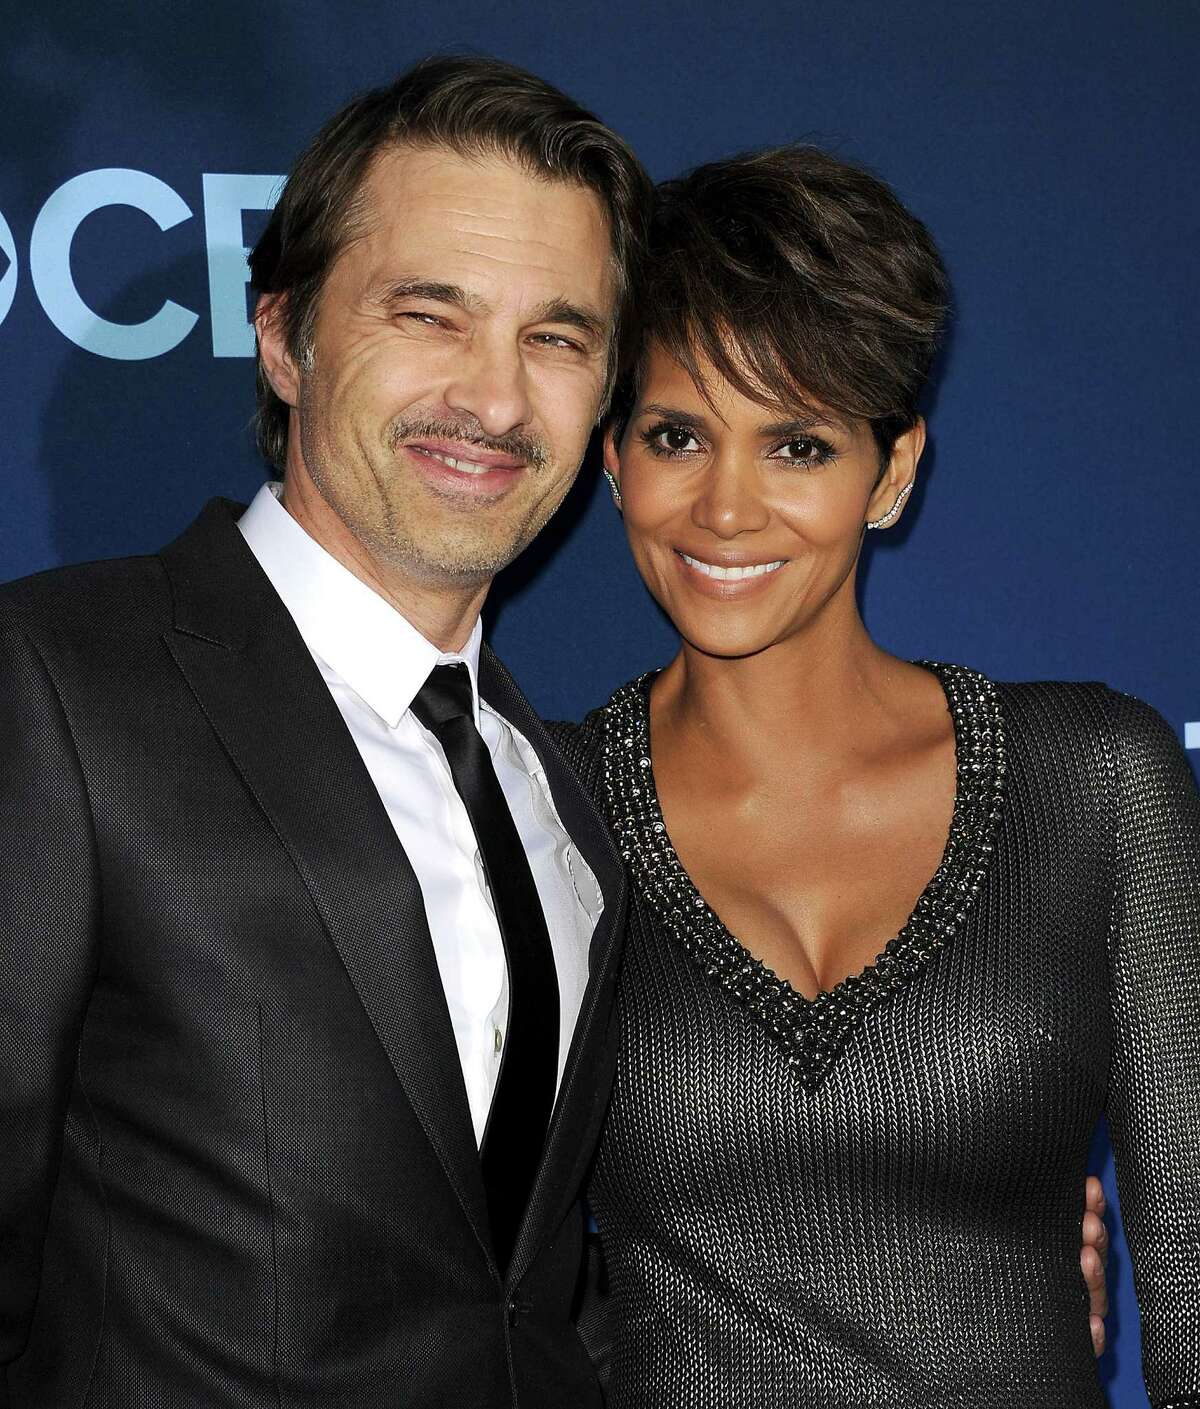 LOS ANGELES, CA - JUNE 16: Actor Olivier Martinez and actress Halle Berry attend the premiere of "Extant" at California Science Center on June 16, 2014 in Los Angeles, California. (Photo by Jason LaVeris/FilmMagic)